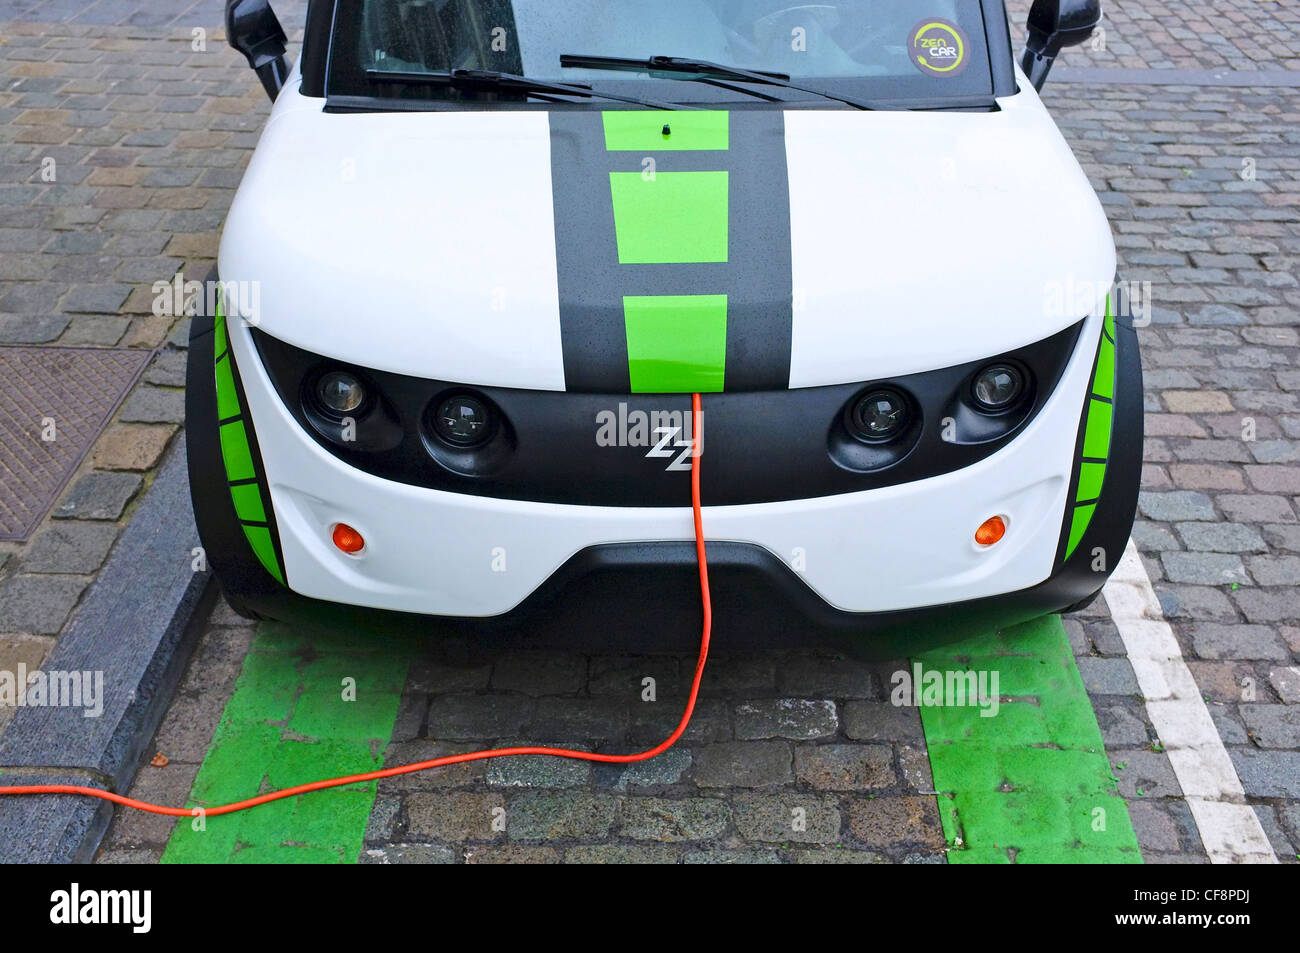 Green energy 'Zen Car' electric car-share vehicle charging up in Brussels city centre Stock Photo